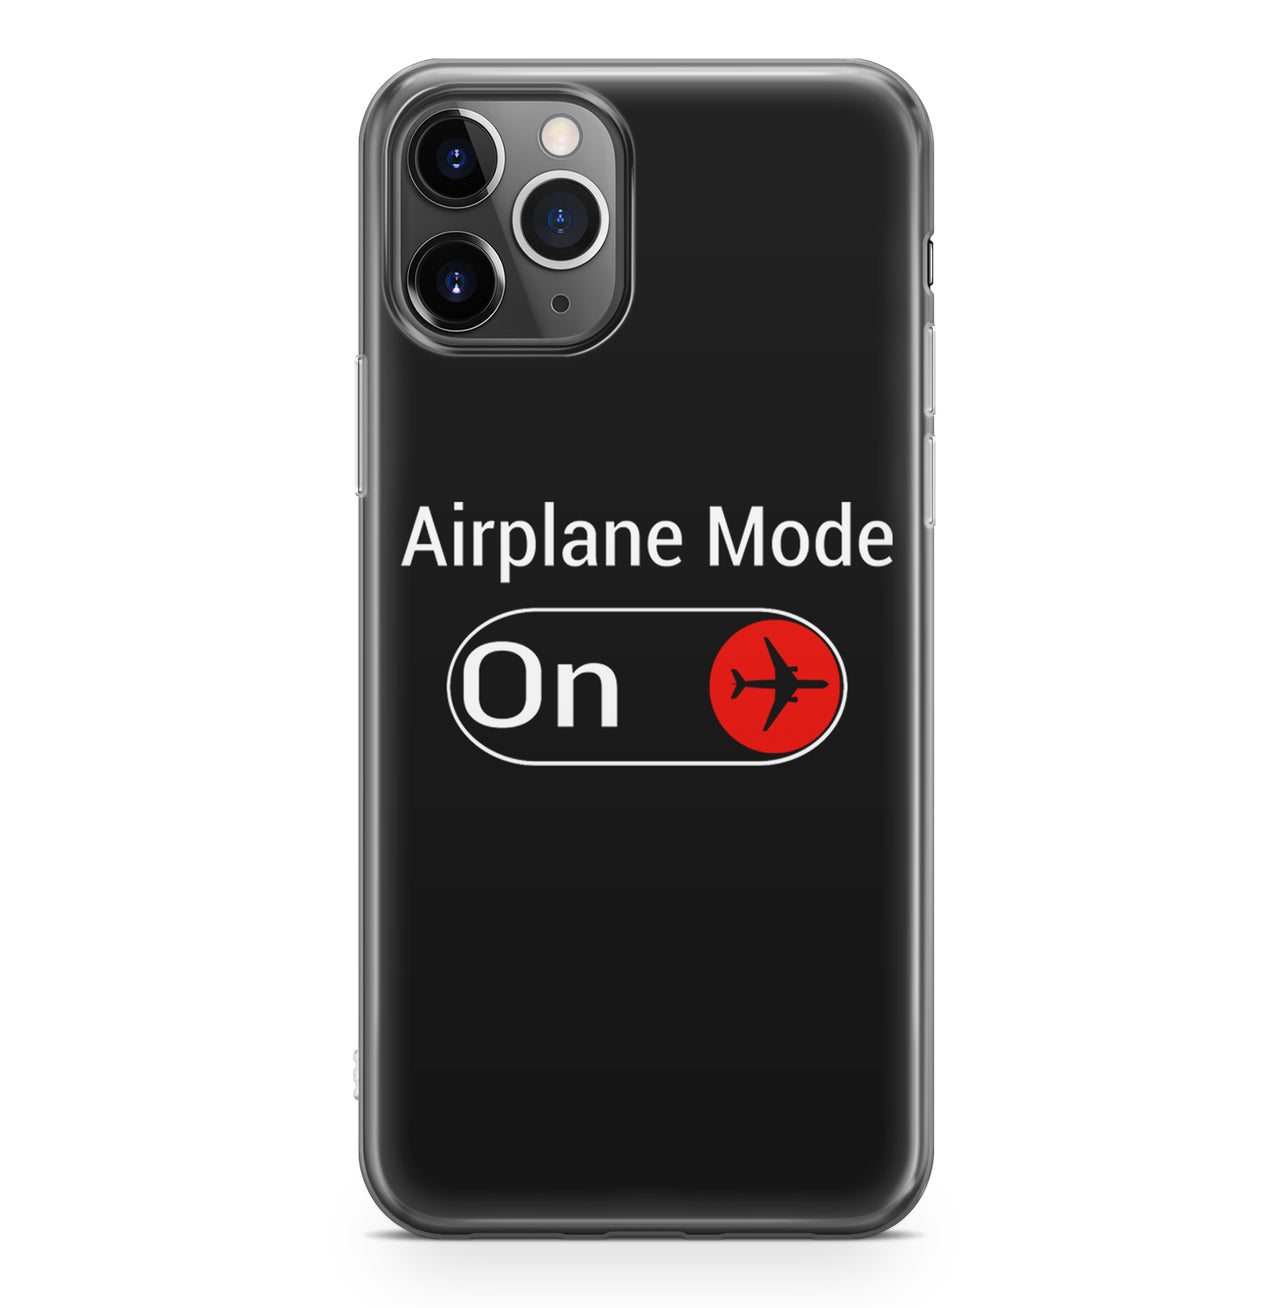 Airplane Mode On Designed iPhone Cases